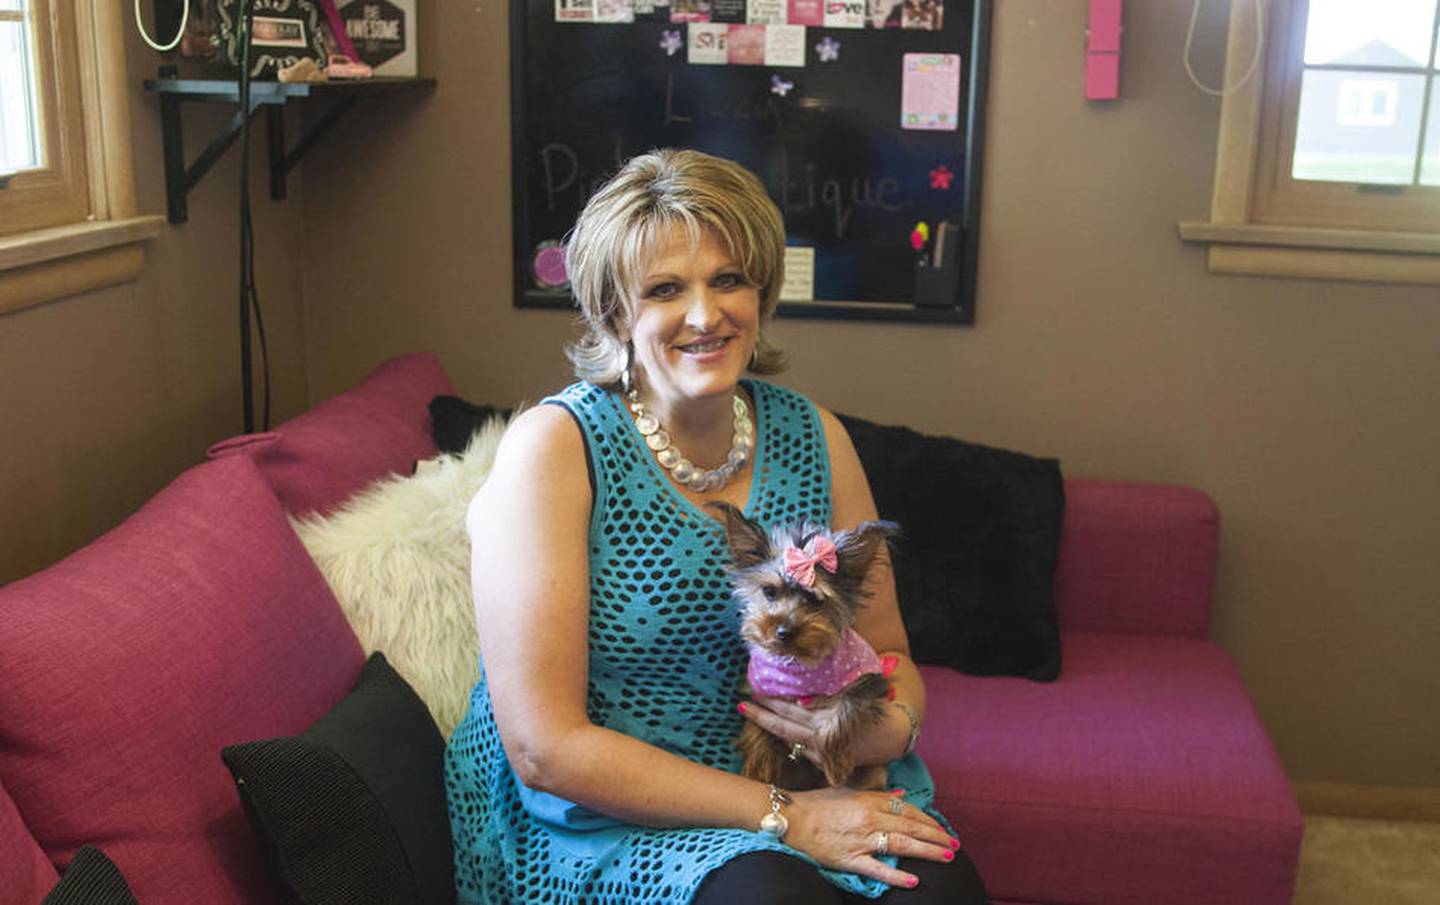 Elizabeth Oparyk and her dog Dallas are pictured at Lizzy's Pink Boutique, Oparyk's shop inside her home at 367 E. Ottawa St. in Sycamore. The boutique is open Tuesday through Saturday by appointment only.